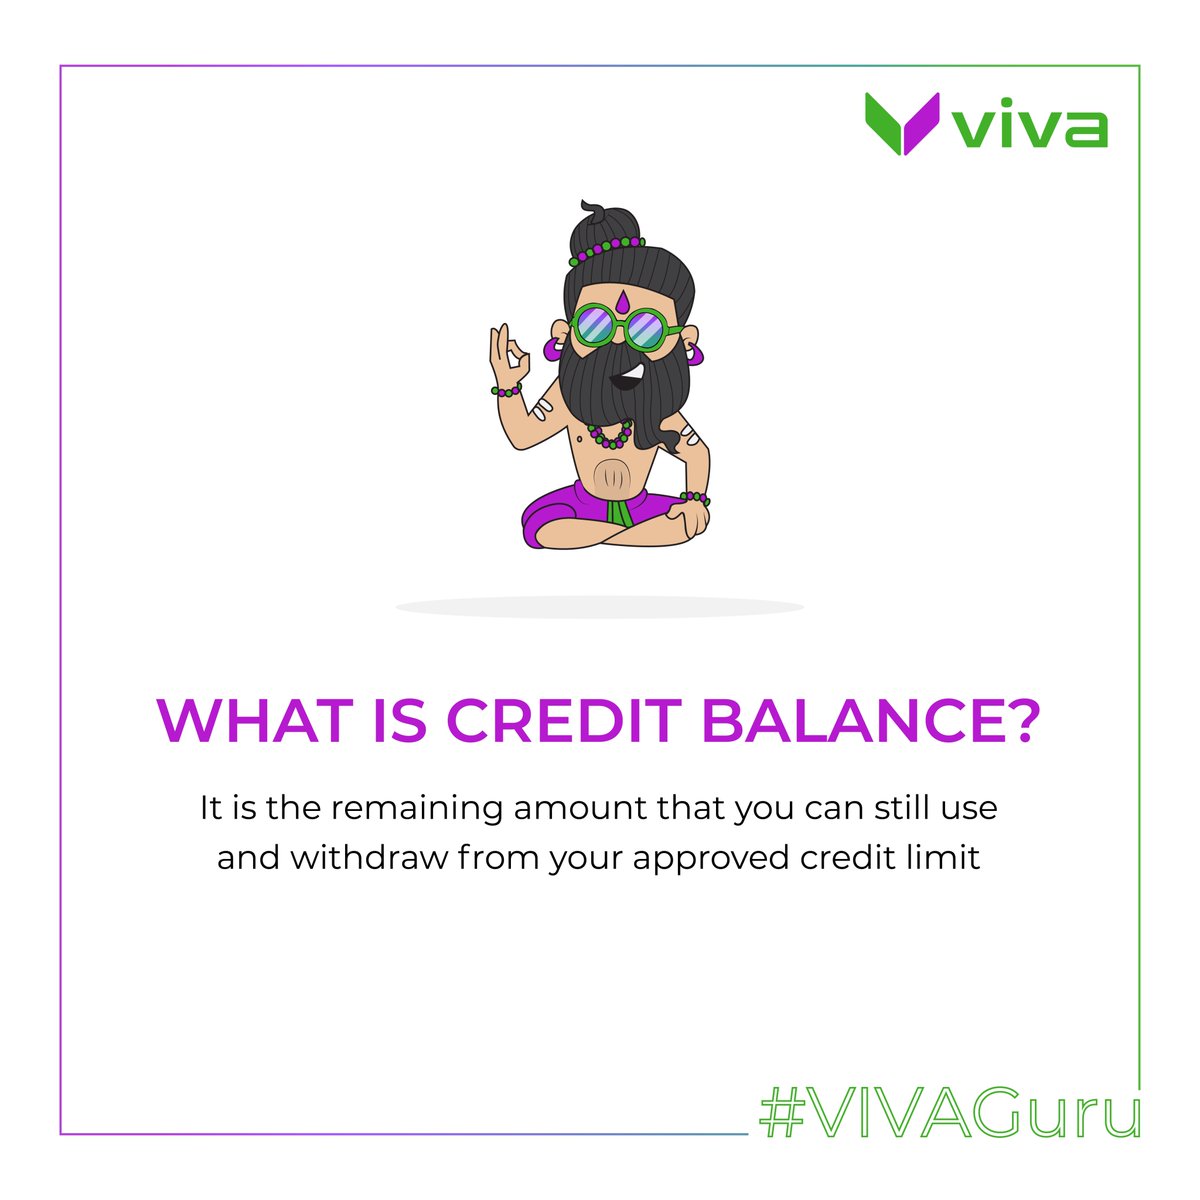 Your money, your rules! 😎
Viva Money's Credit Balance brings convenience to your fingertips – use it for bills, online shopping, or cash withdrawals – the choice is yours!

#CreditBalance #CreditLine #InstantLoan  #InterestFreeCredit #FinancialKnowledge #VivaGuru #VivaMoney